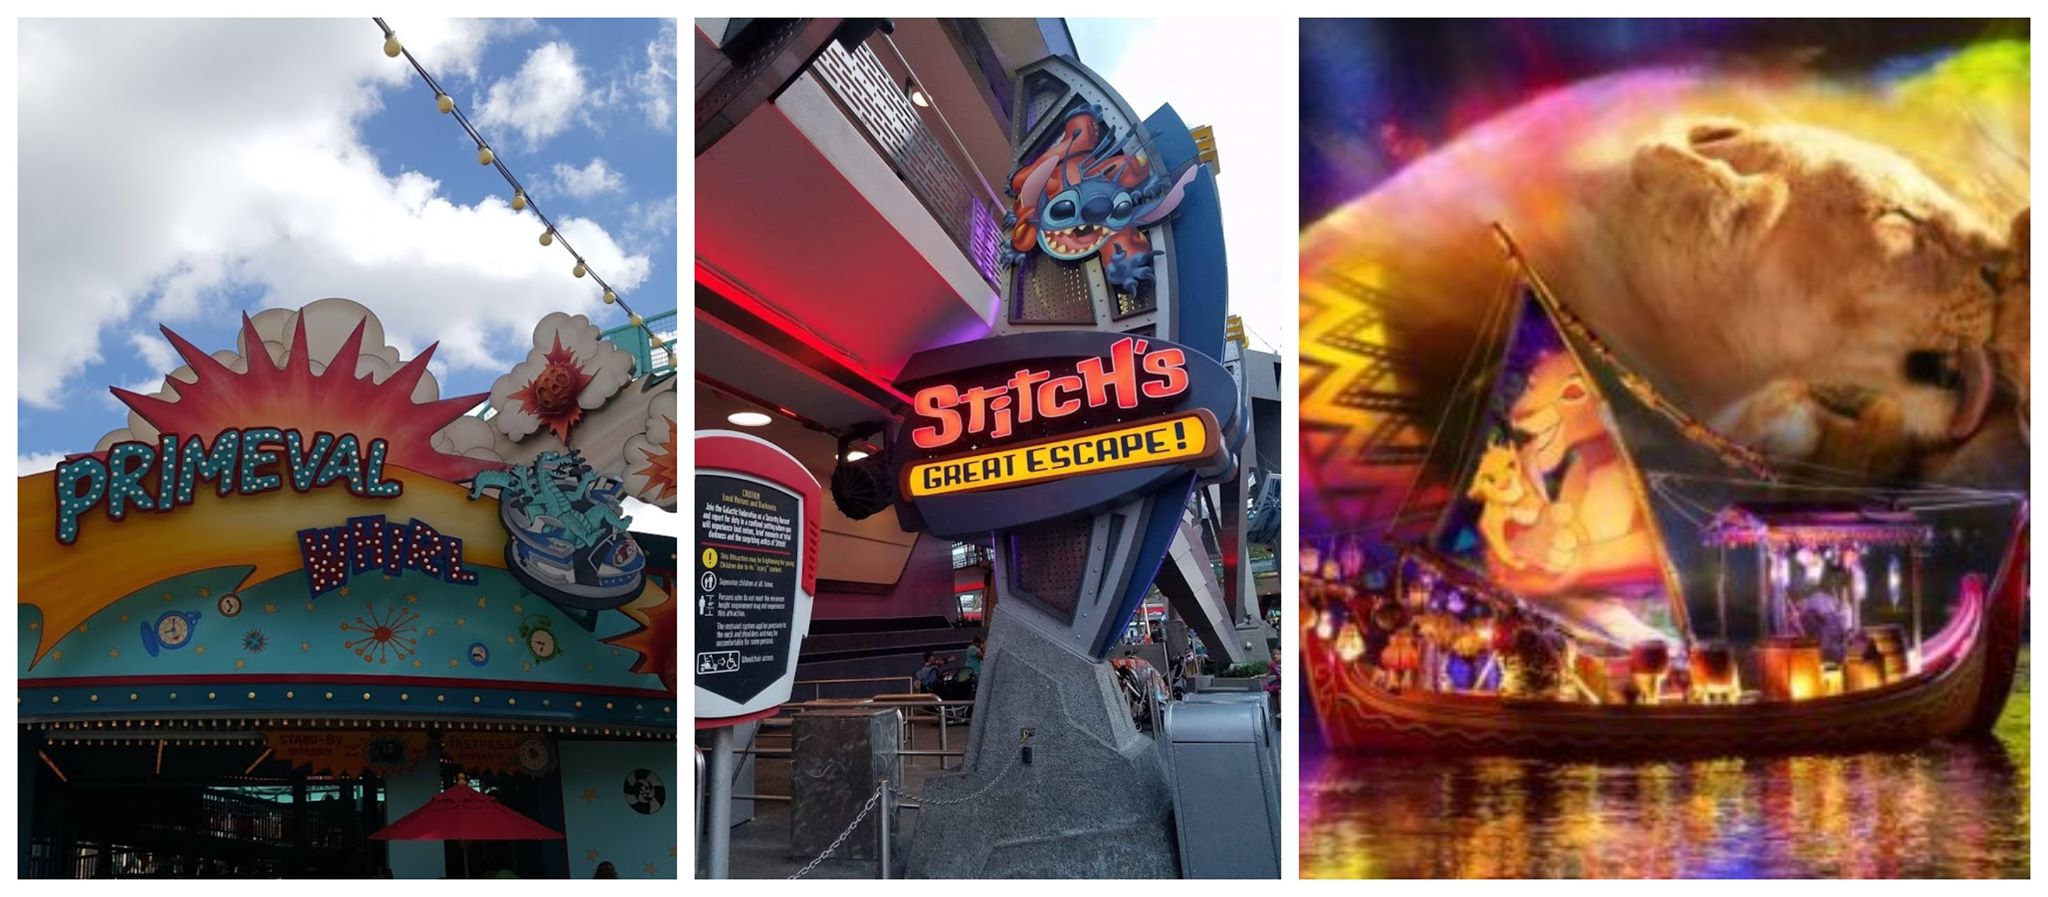 Primeval Whirl, Stitch’s Great Escape and Rivers of Light are now permanently closed!